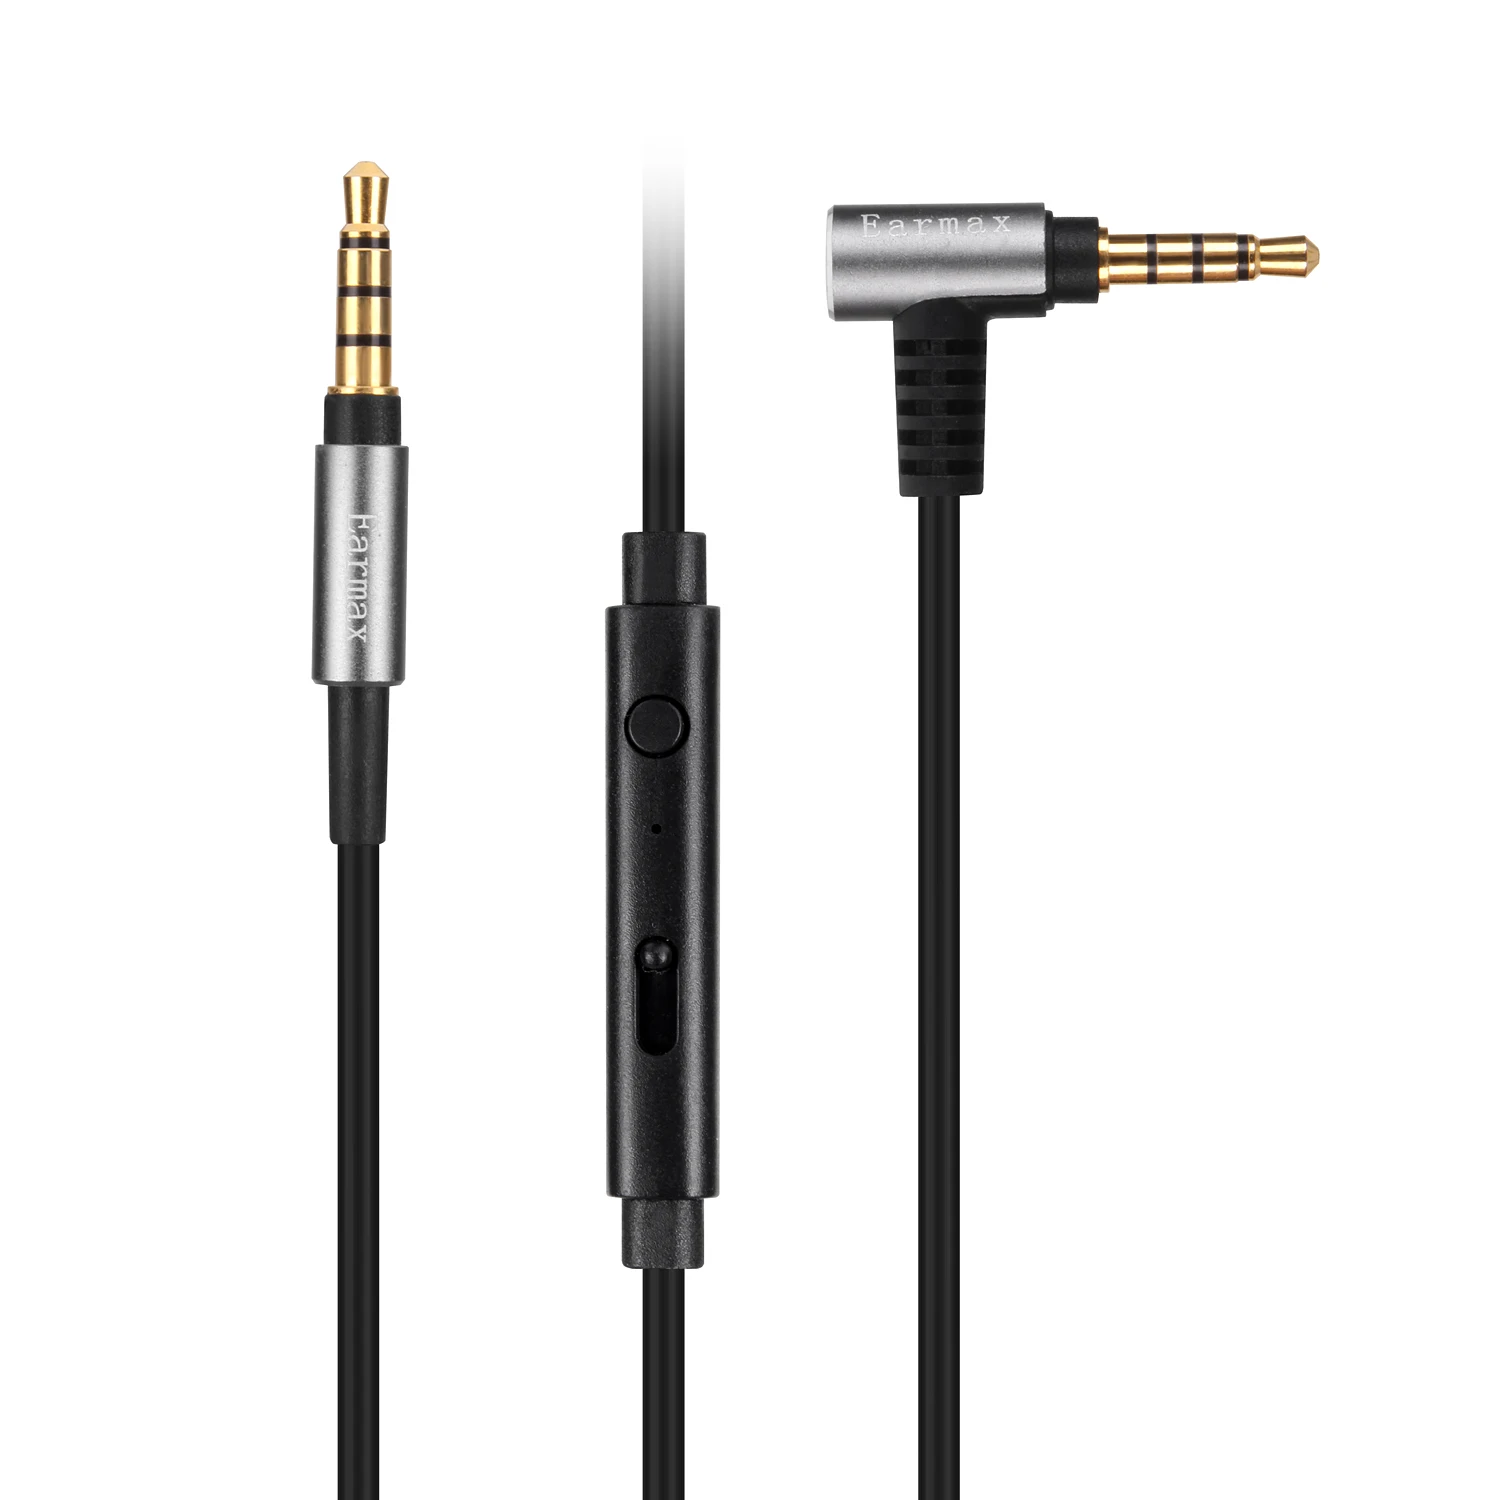 

Black OCC Audio Cable With Mic For Audio Technica ATH-M50xBT MSR7 MSR7SE MSR7NCSR50 SR50BT SR5 SR5BT AR3BT AR3 headphones